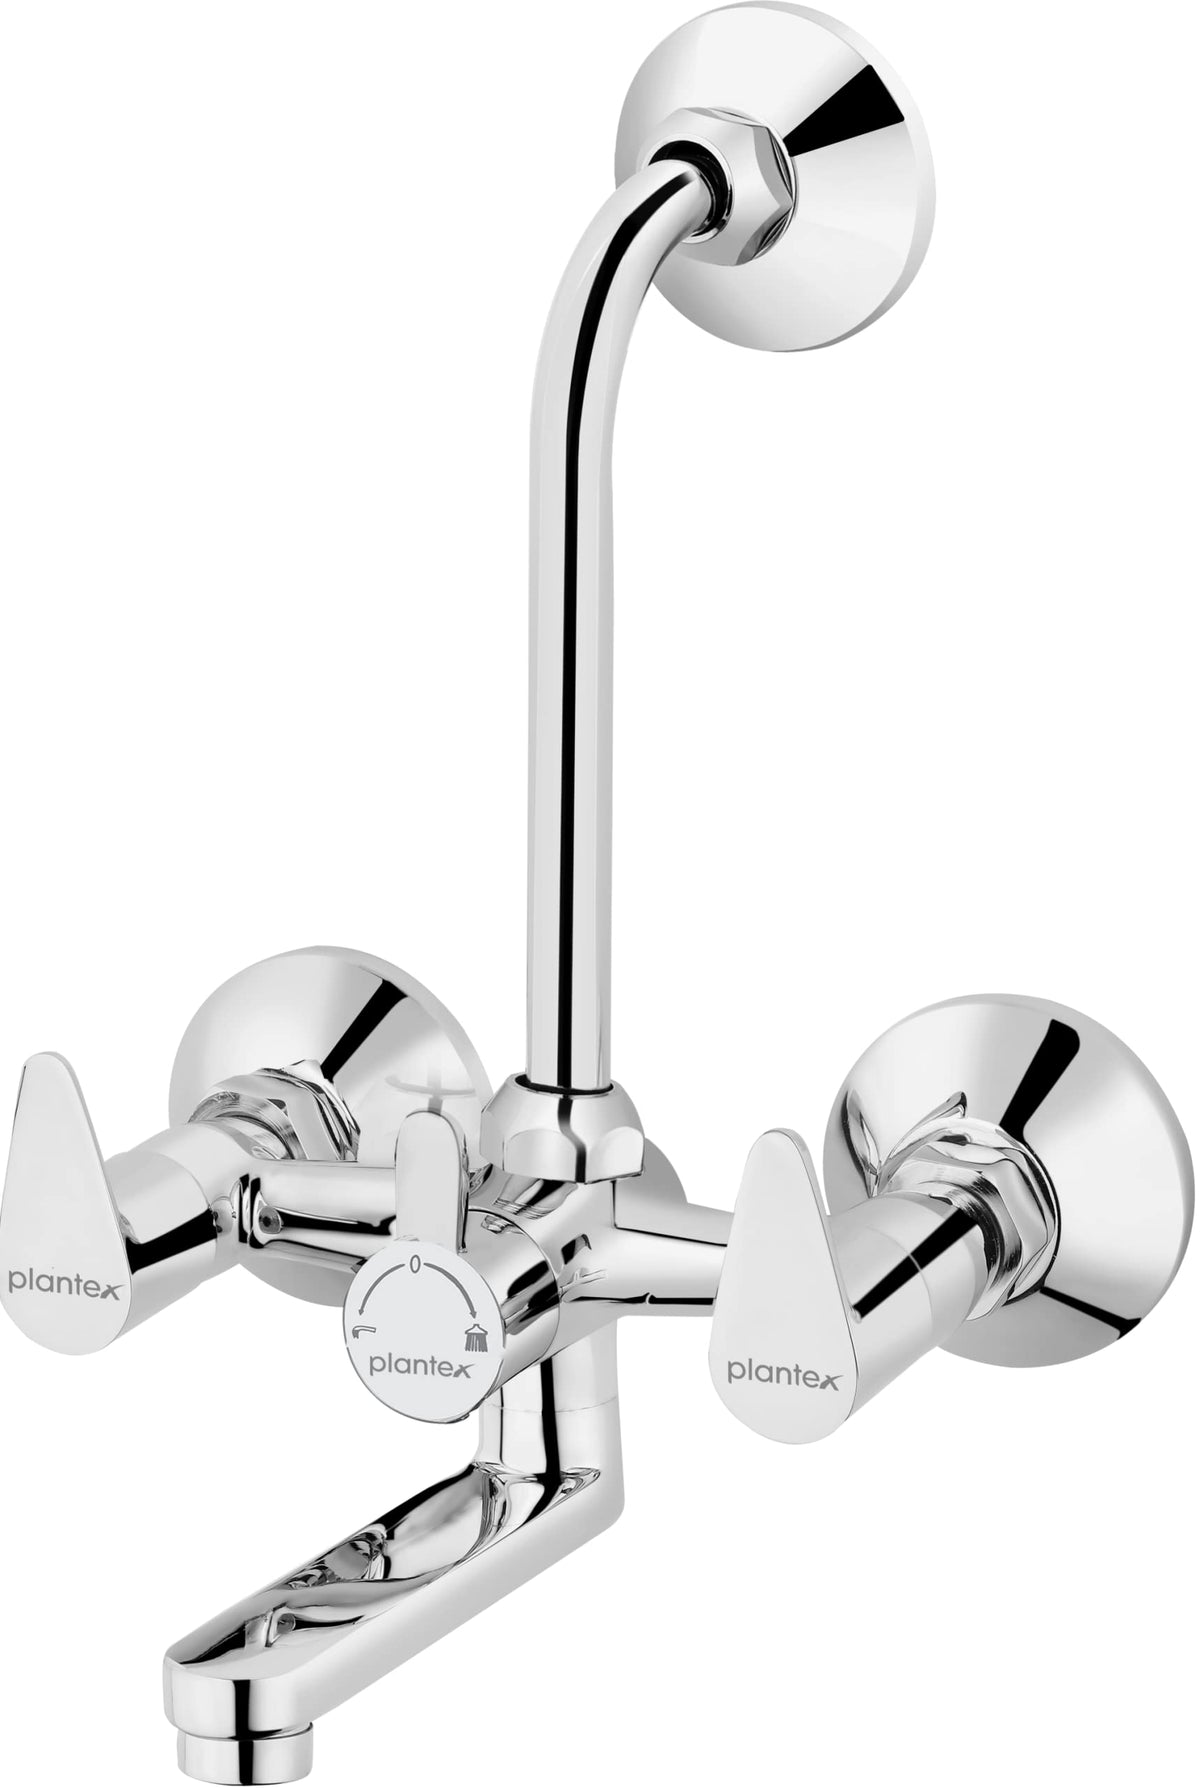 Plantex Pure Brass PAC-1818 2-in-1 Wall Mixer with Telephonic Bend for Arrangement of Overhead Shower/Wall Mixer for Bathroom with Brass Wall Flange & Teflon Tape - Wall Mount (Mirror-Chrome Finish)